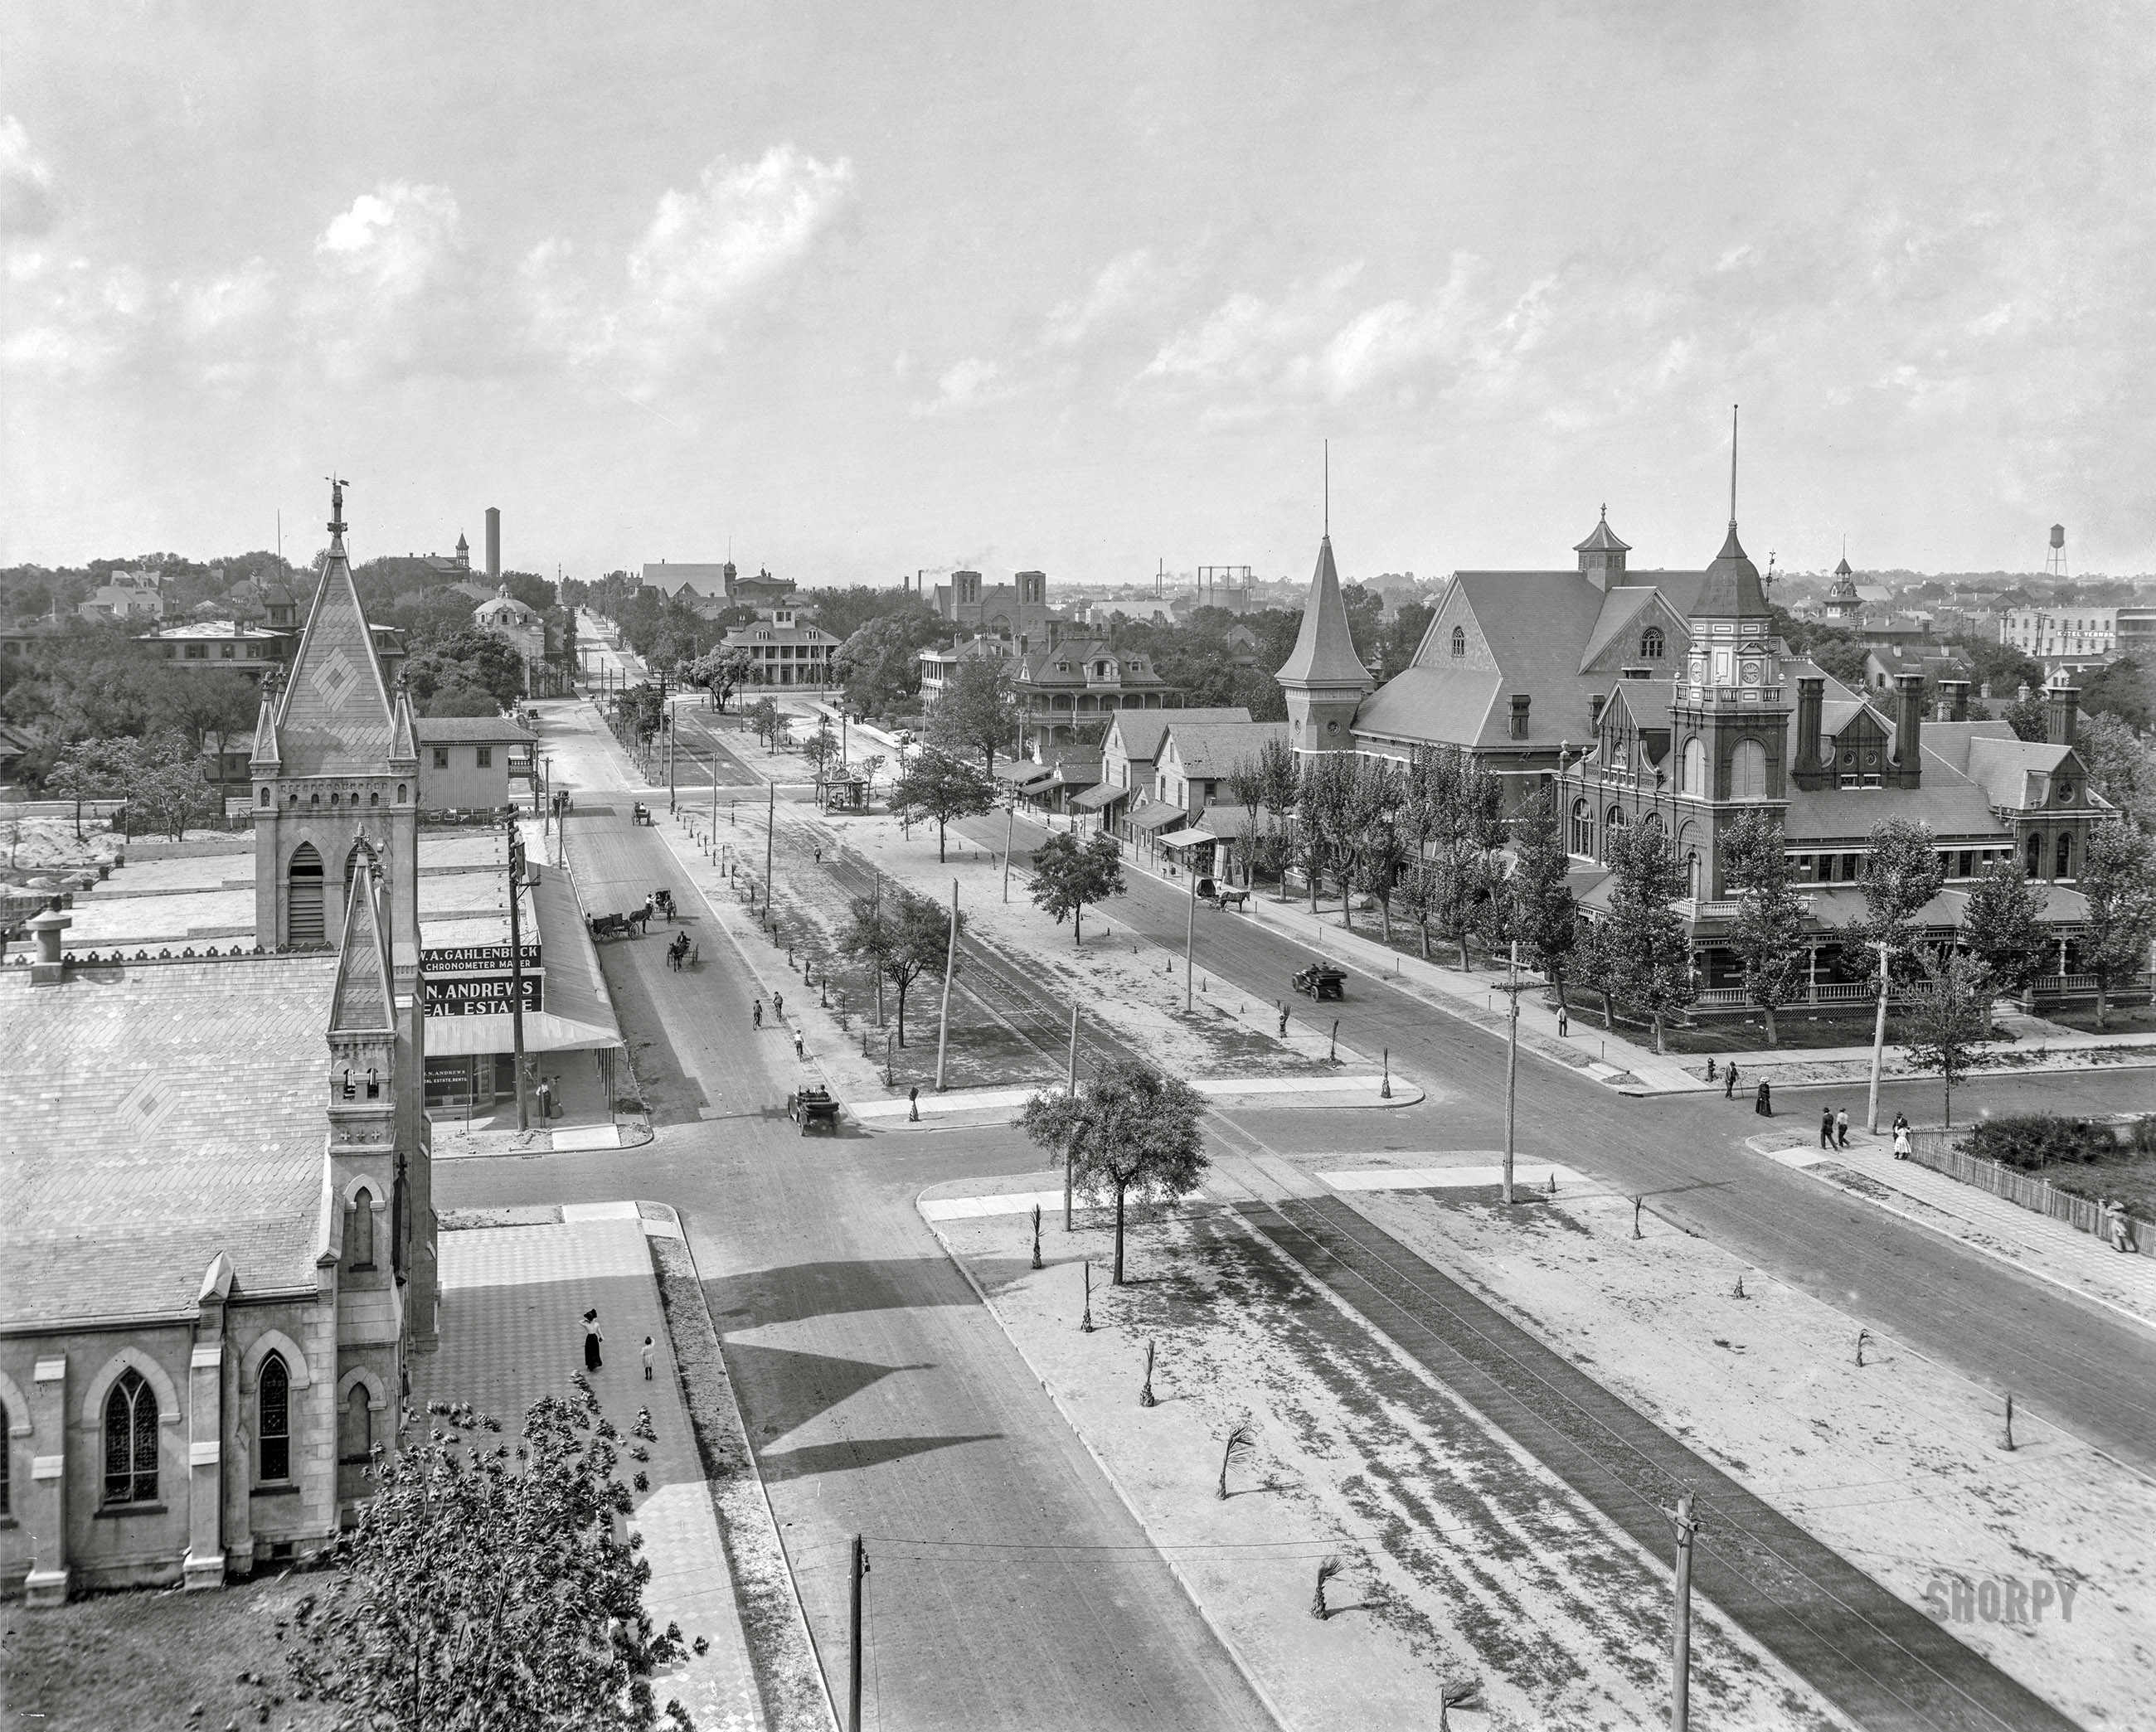 Pensacola, Florida, circa 1910. "Looking north on Palafox Street." Note the Pepsi-Cola streetcar stop. 8x10 inch glass negative, Detroit Publishing Company. View full size.